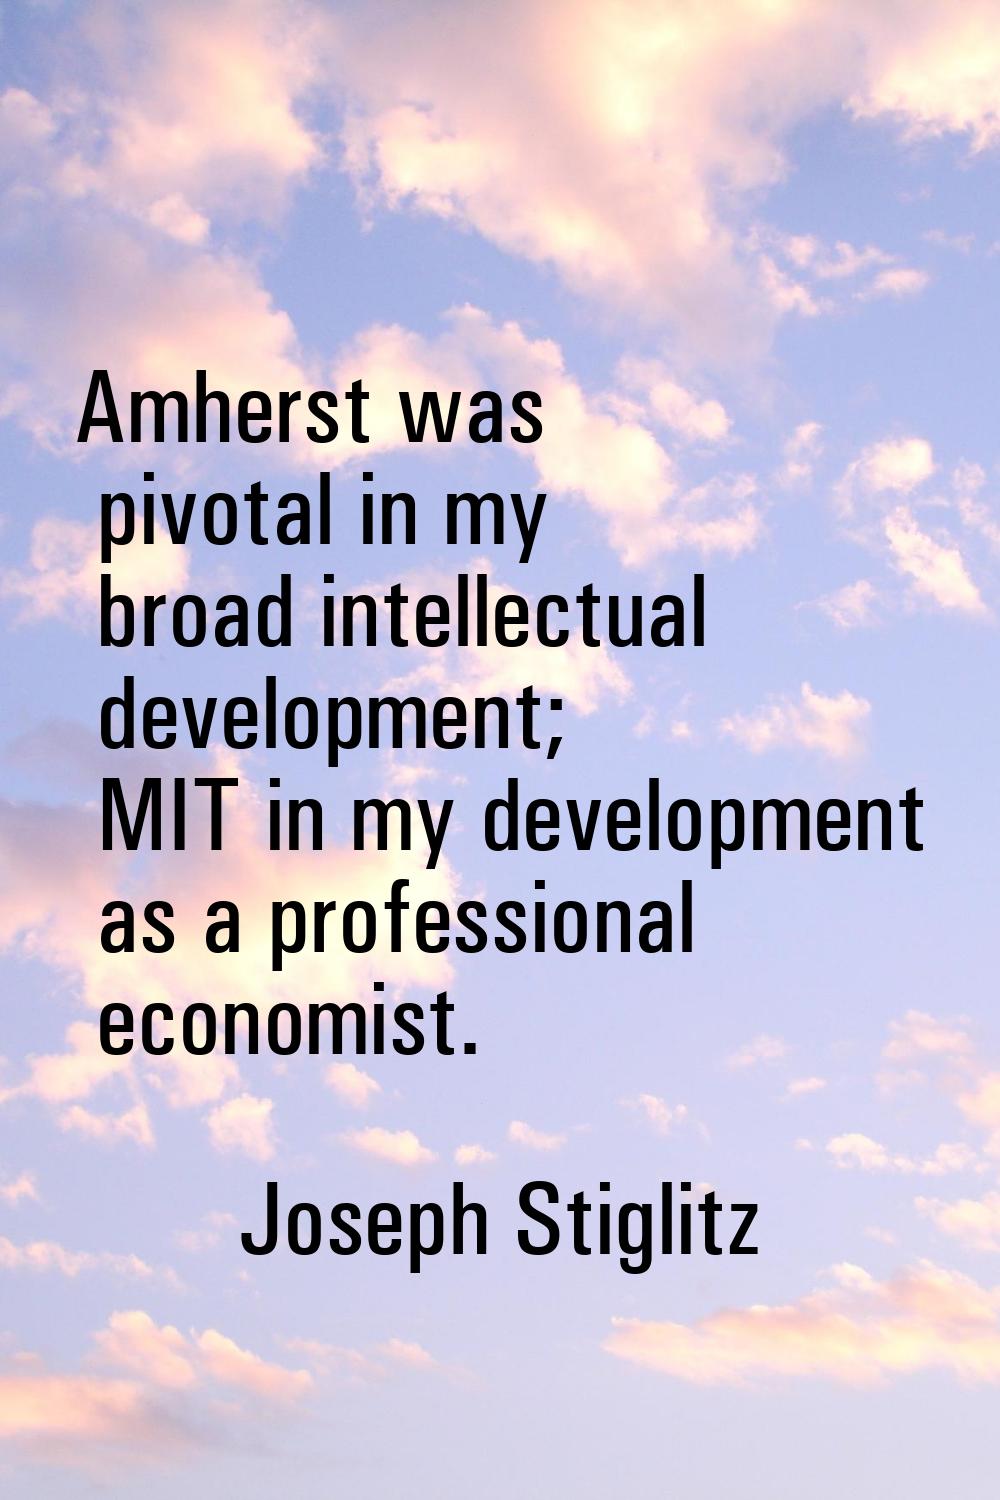 Amherst was pivotal in my broad intellectual development; MIT in my development as a professional e